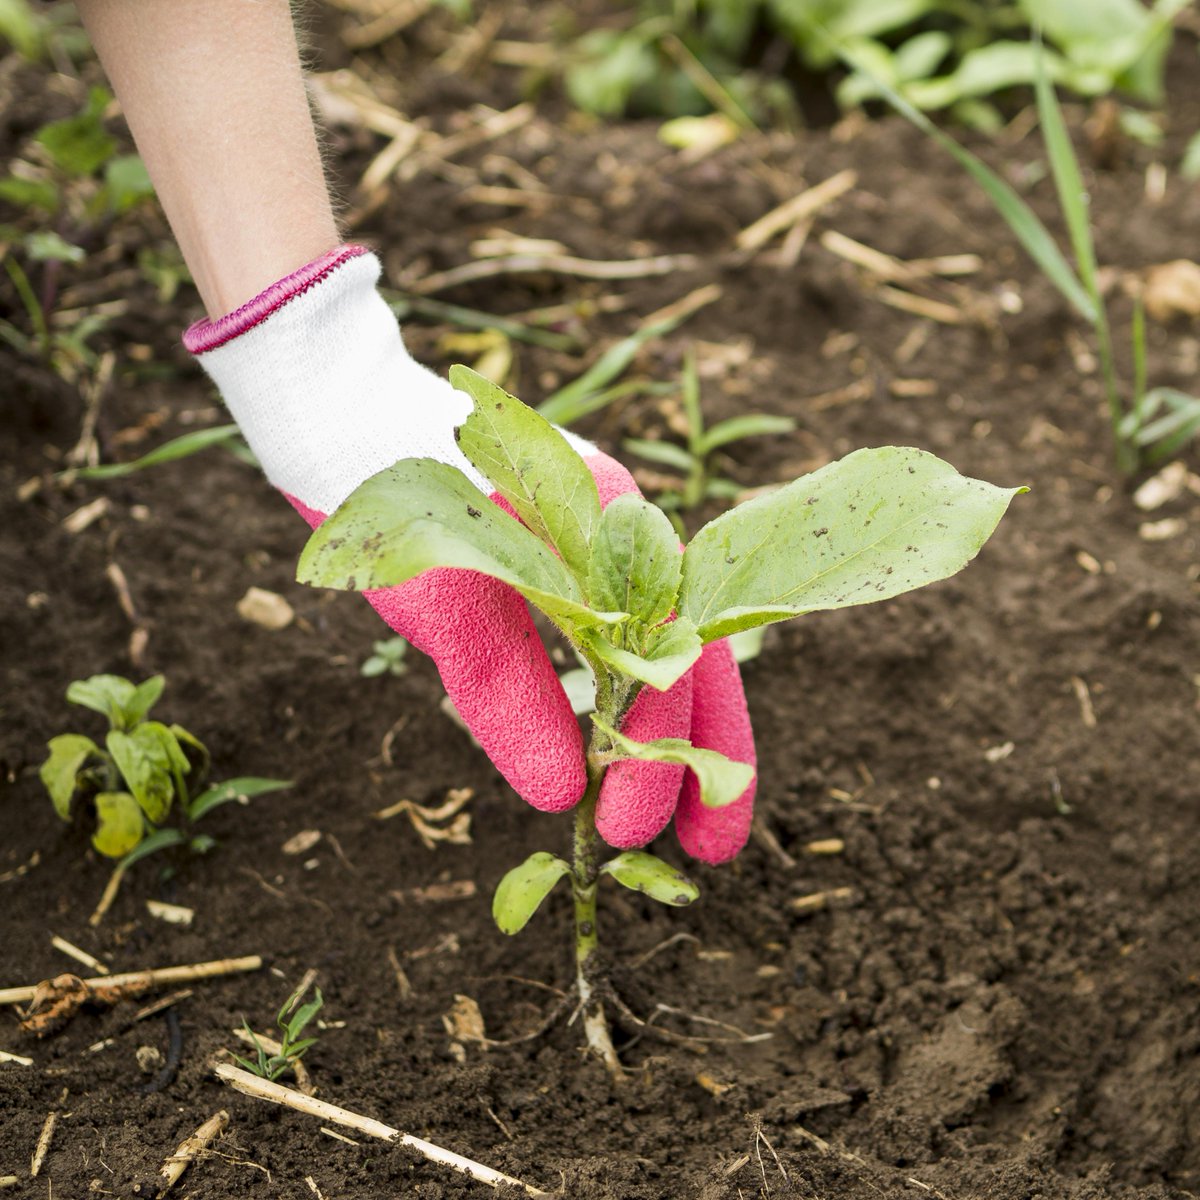 Fancy checking out our gardening plot right here on campus? Join us on Thursday 29th June, 11:00am at the Students' Union for FREE #GIAG Gardening. Come along & help with some gardening, plant some seeds & have a chat 🪴 Find out more and book now: bit.ly/43k7uCo